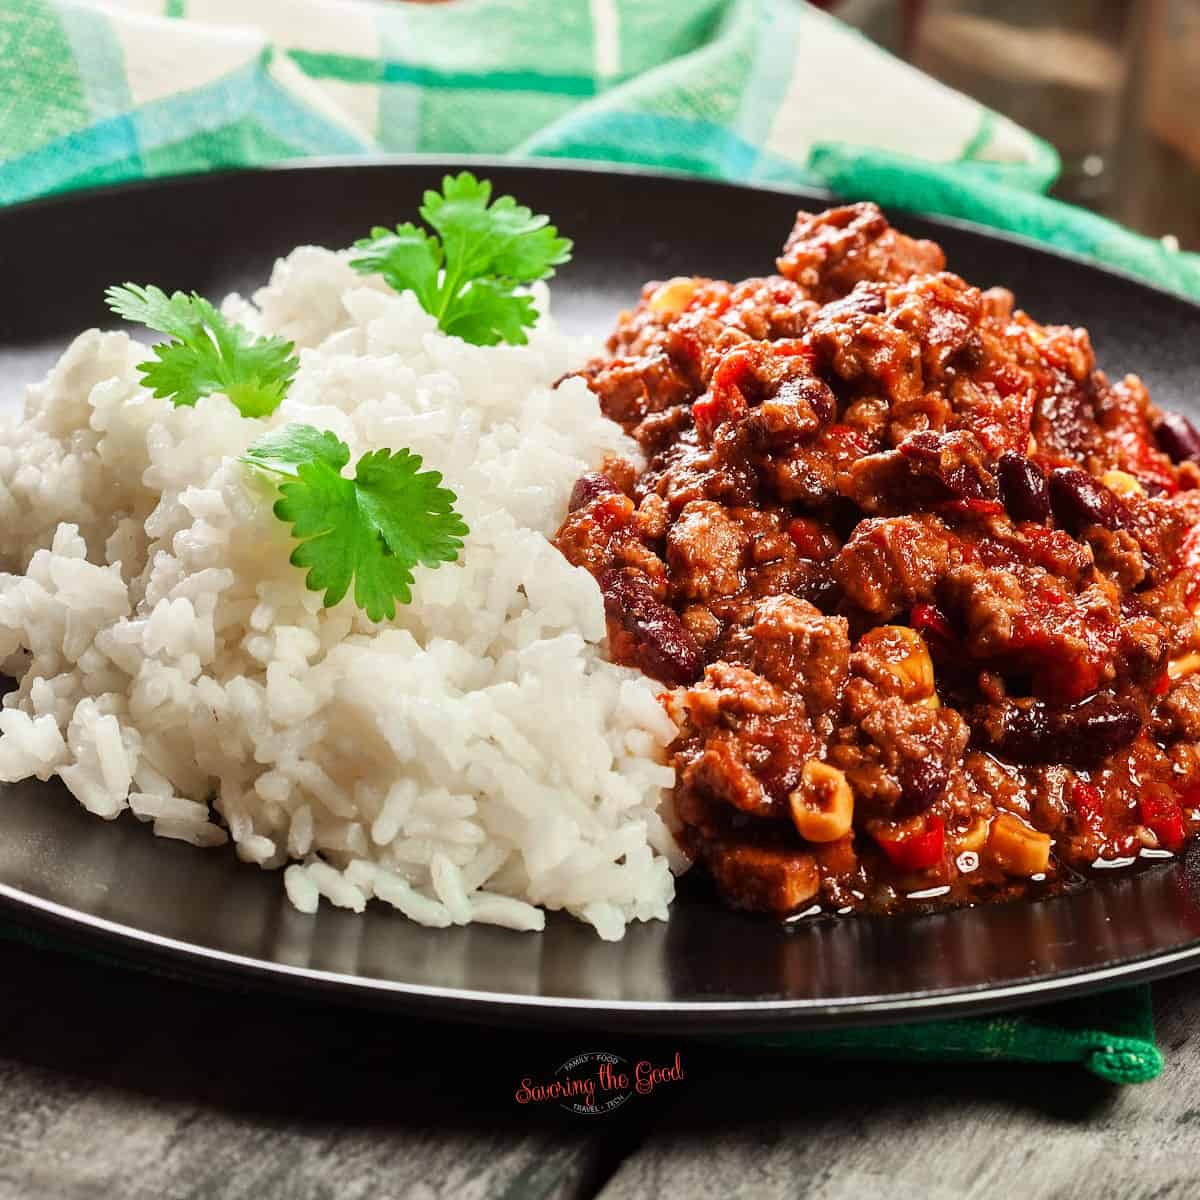 A plate with rice and chili on it.